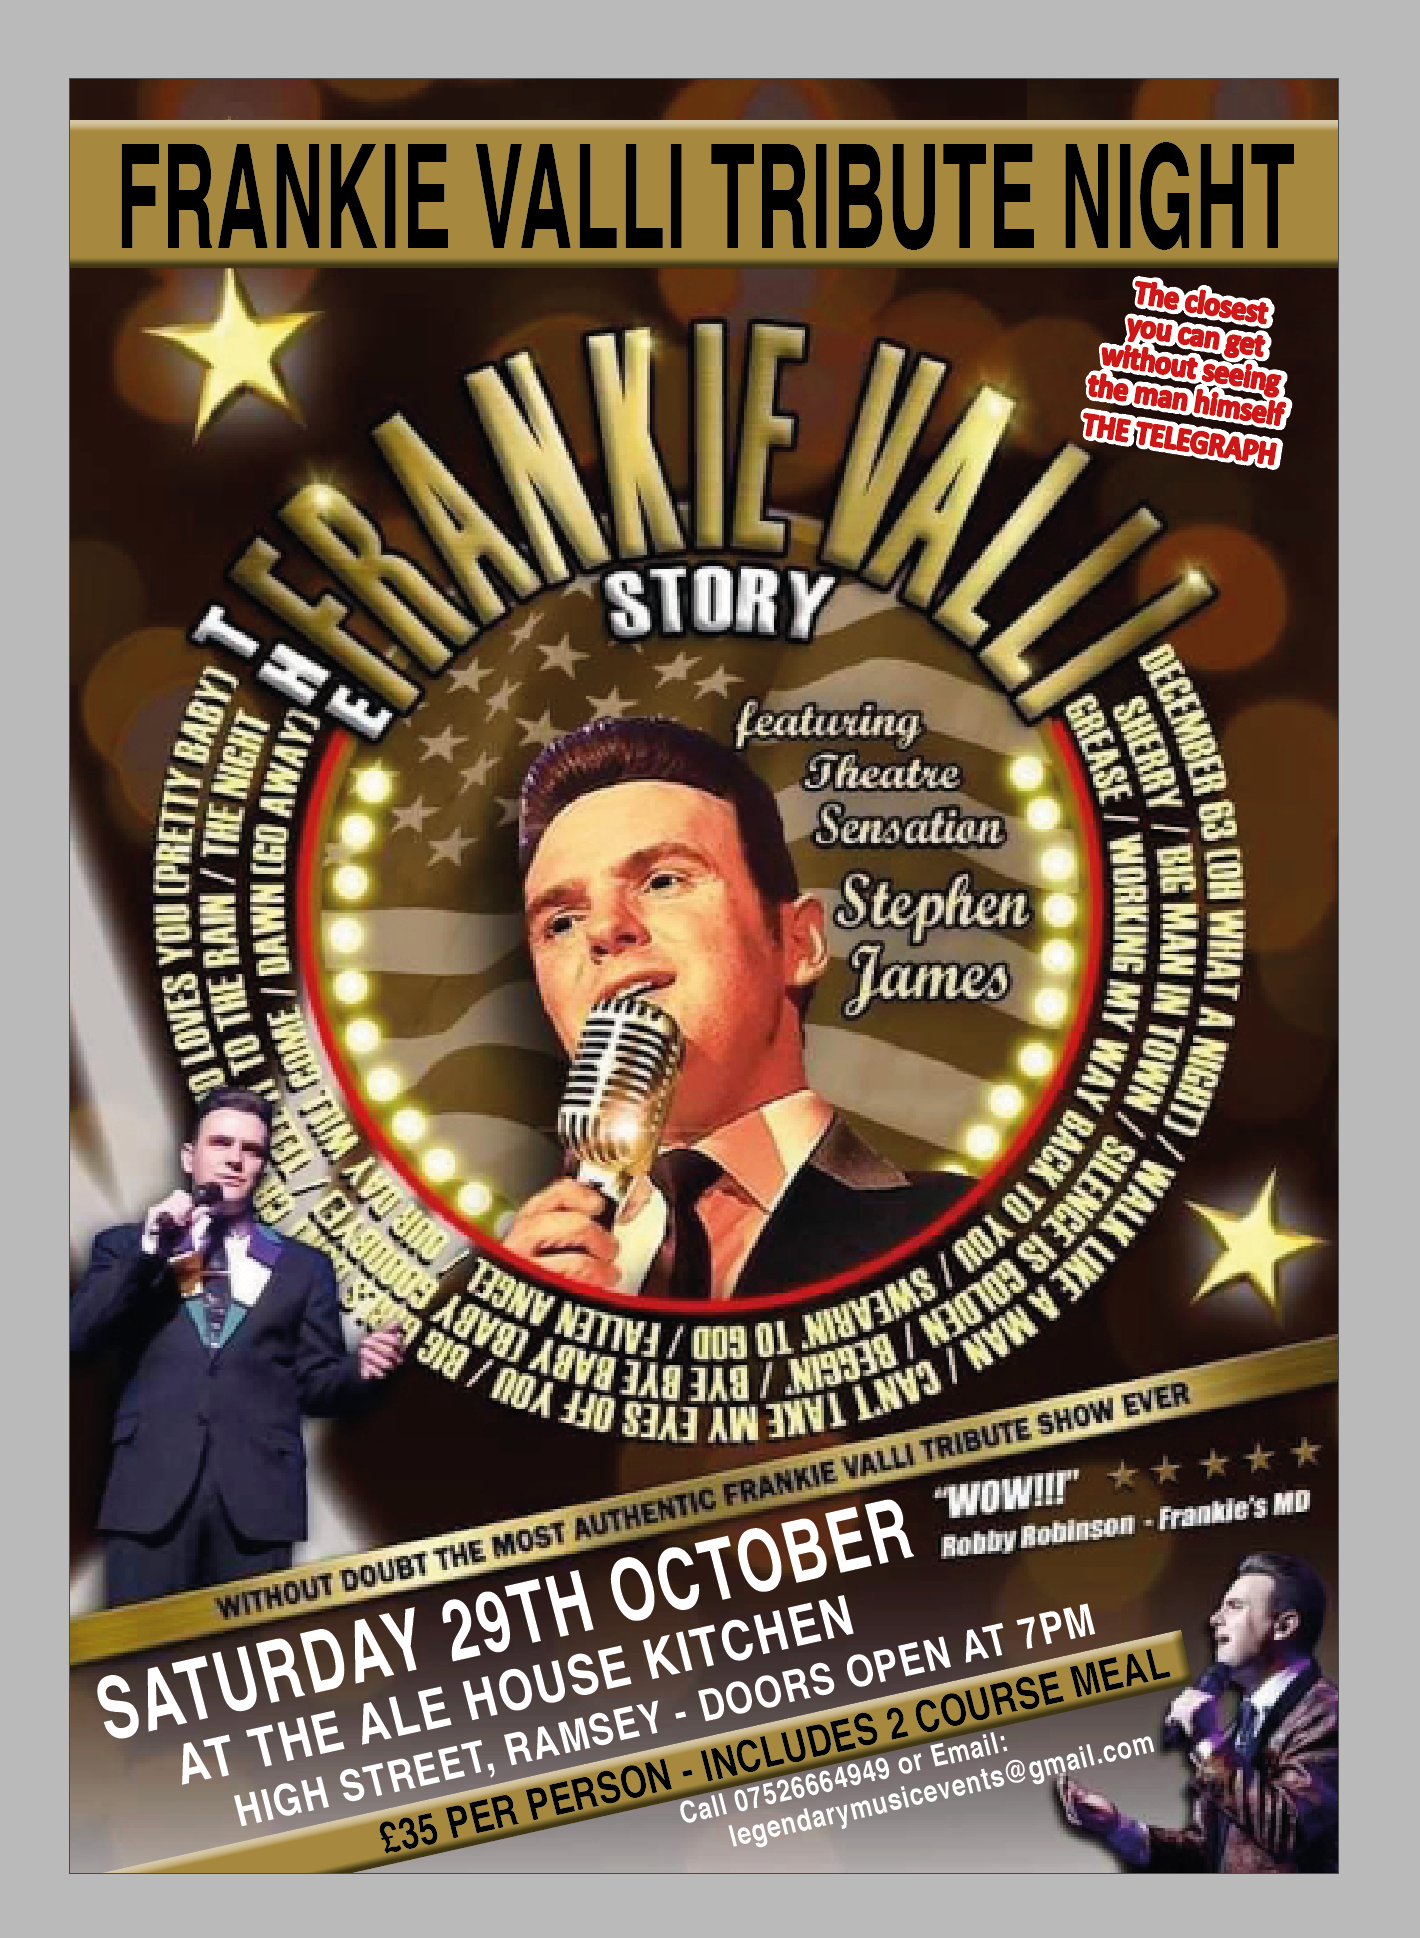 Frankie Valli Tribute inc 2 Course Meal  on oct. 29, 19:00@The Ale House Kitchen - Buy tickets and Get information on whittlesey music nights 